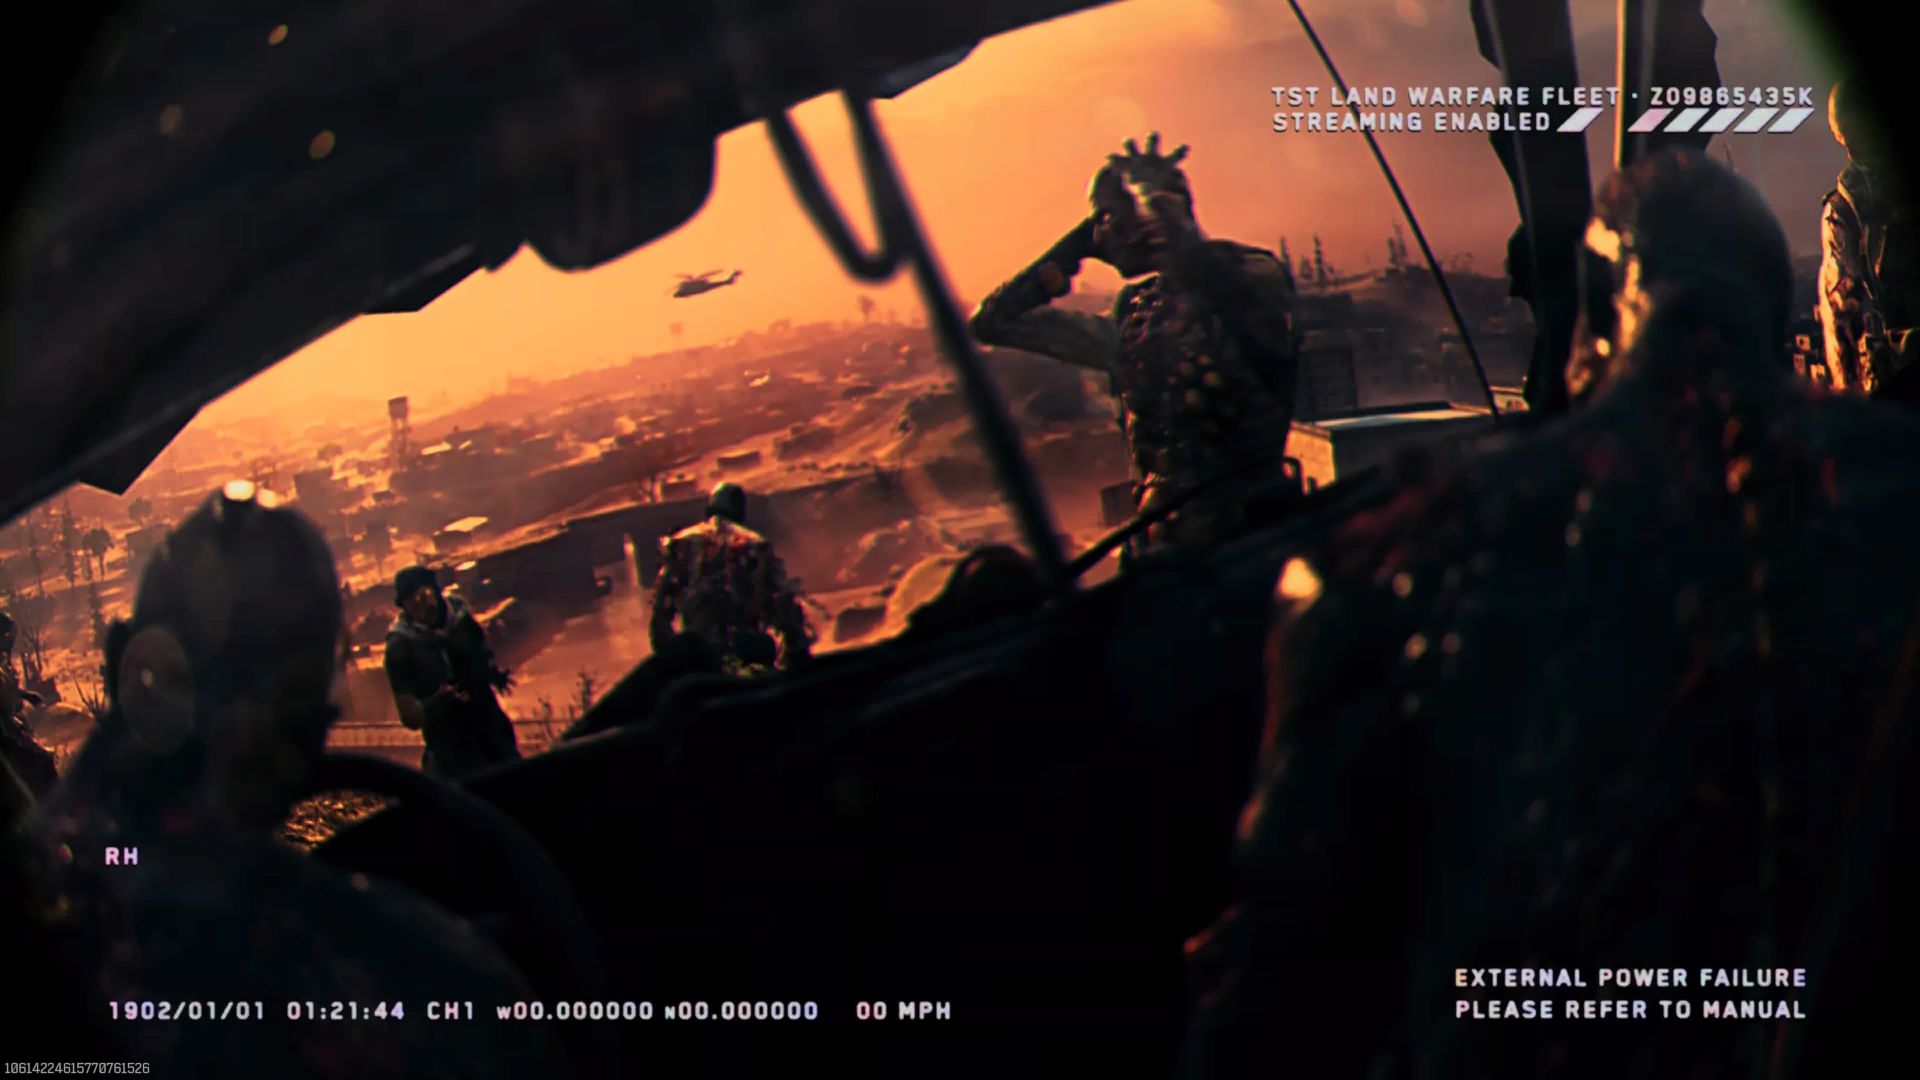 Screenshot from CAll of Duty Modern Warfare 3's Open-world Zombie mode loading screen from the back of a crashed car with zombies wondering around it and a destroyed city cast in a red and orange light in the background.